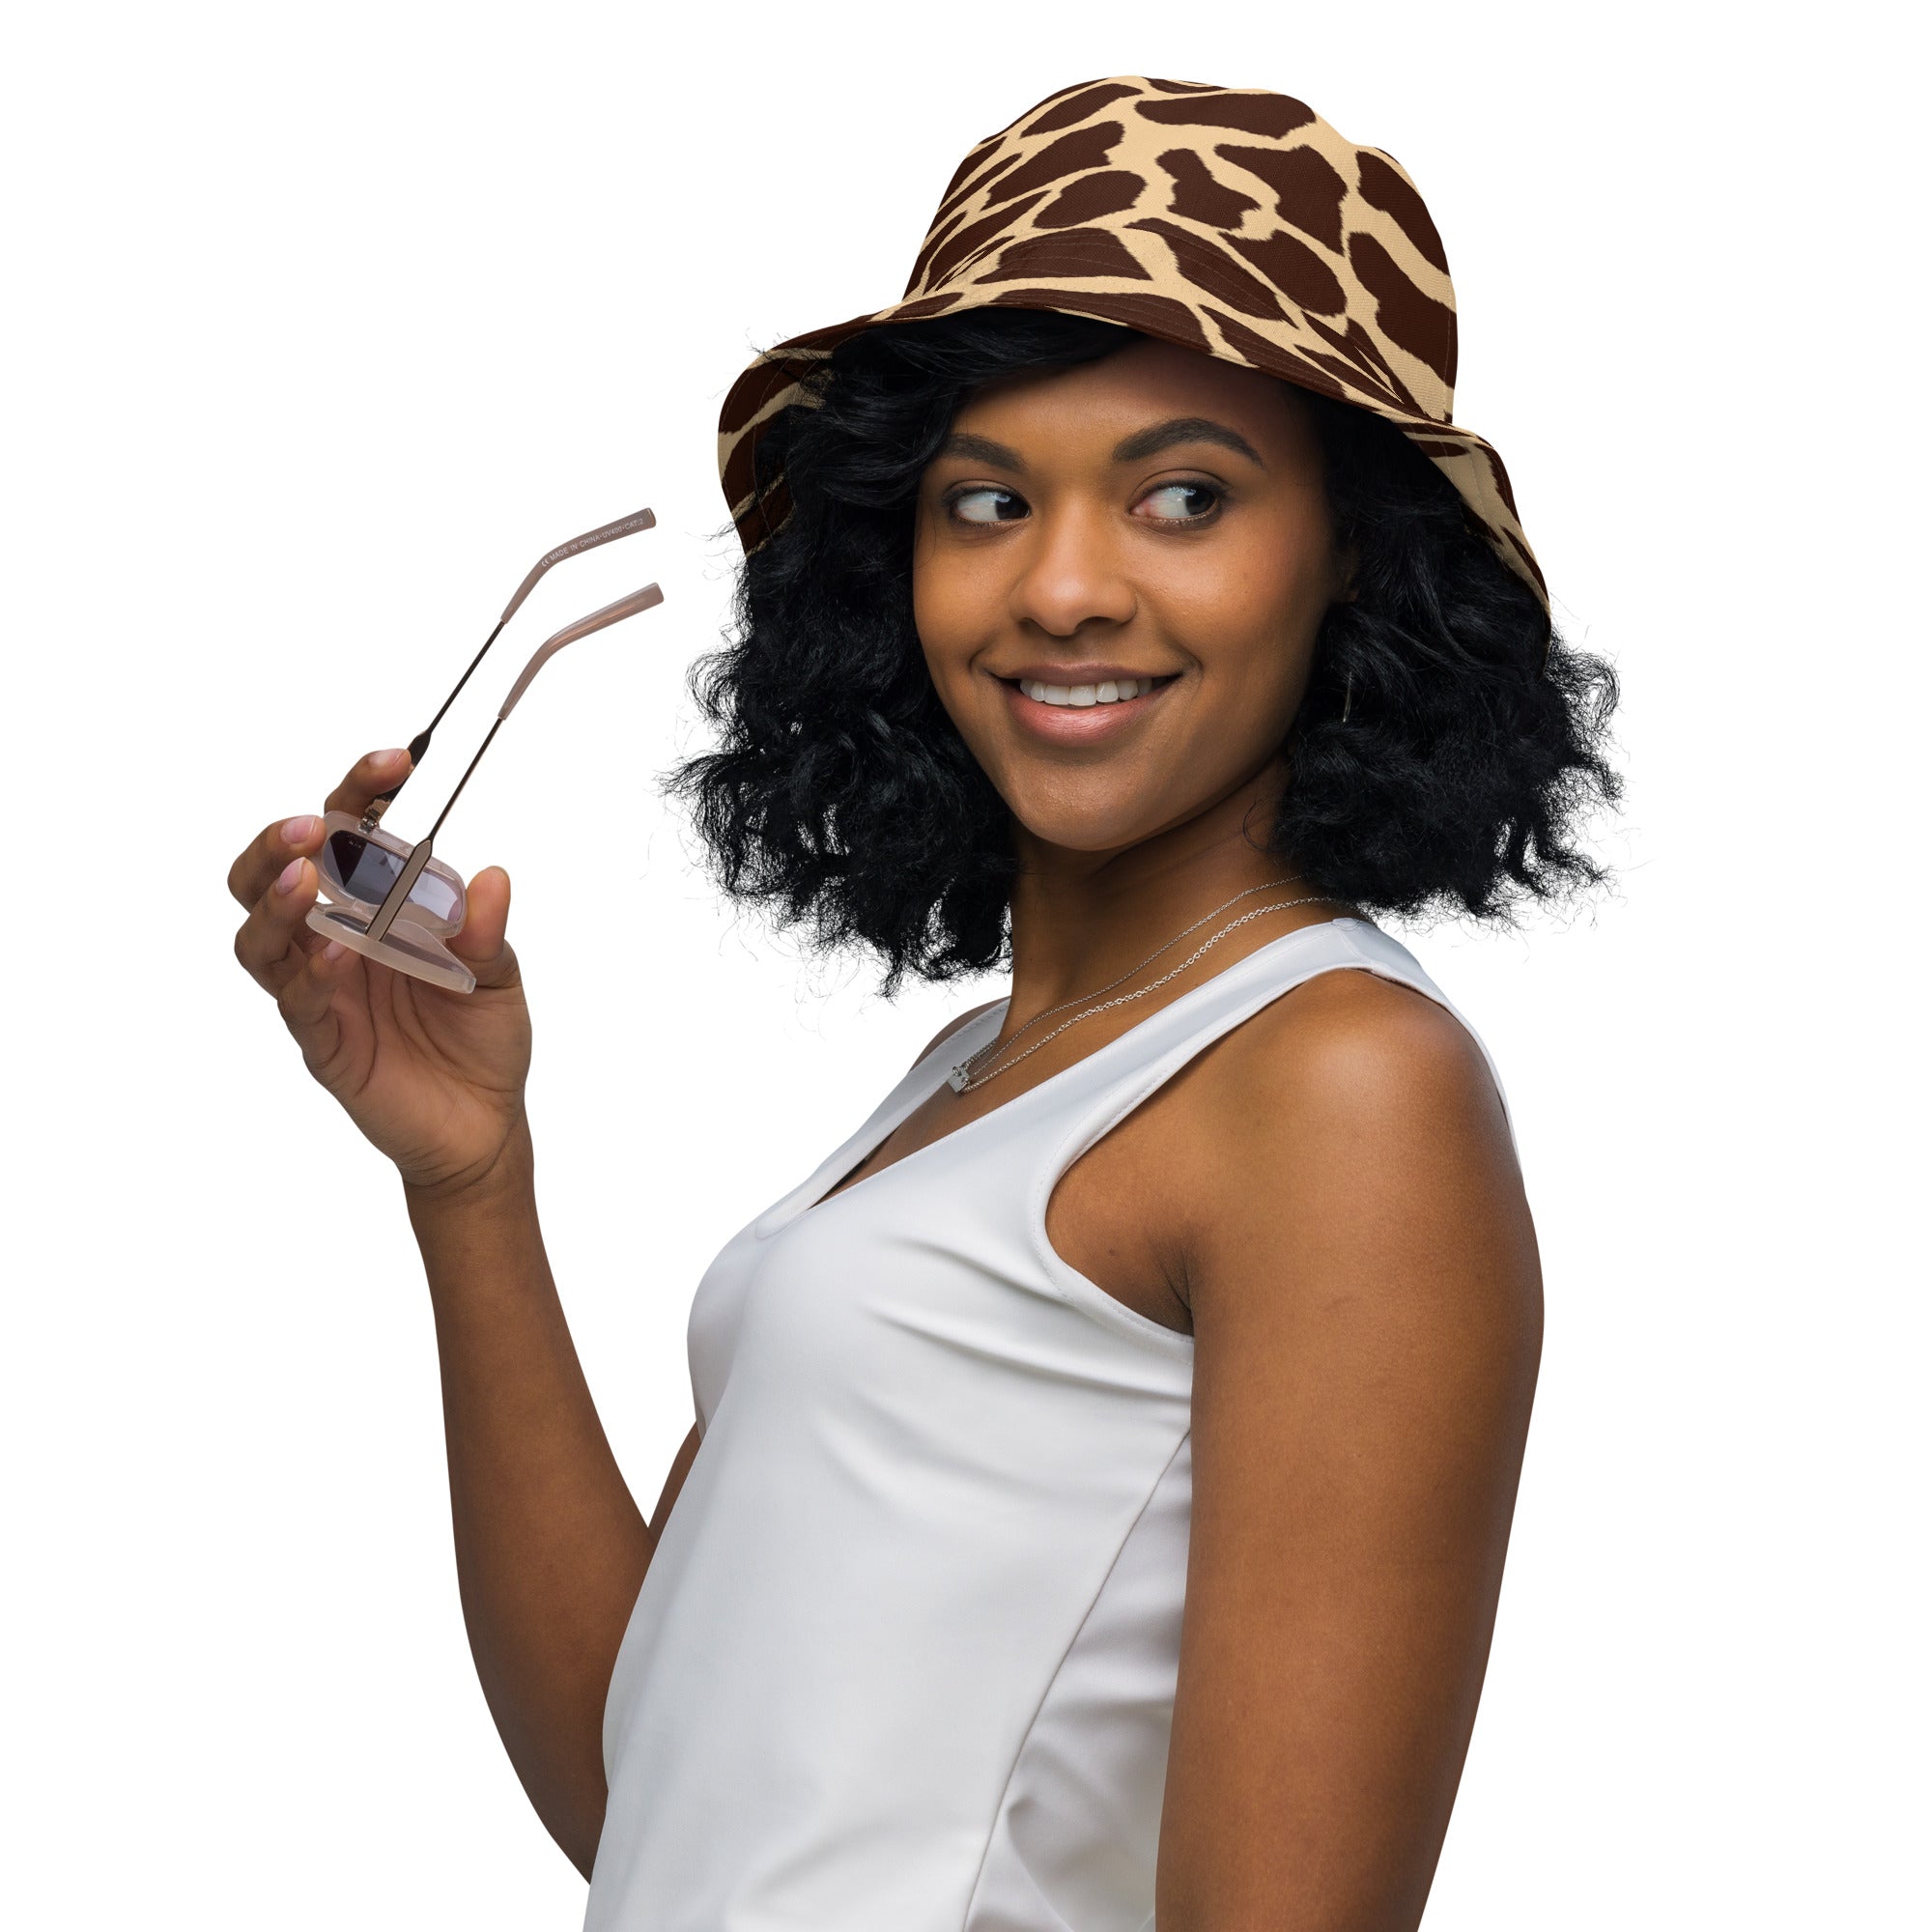 "Safari Chic: Stand Tall with Our Giraffe Bucket Hat", lioness-love